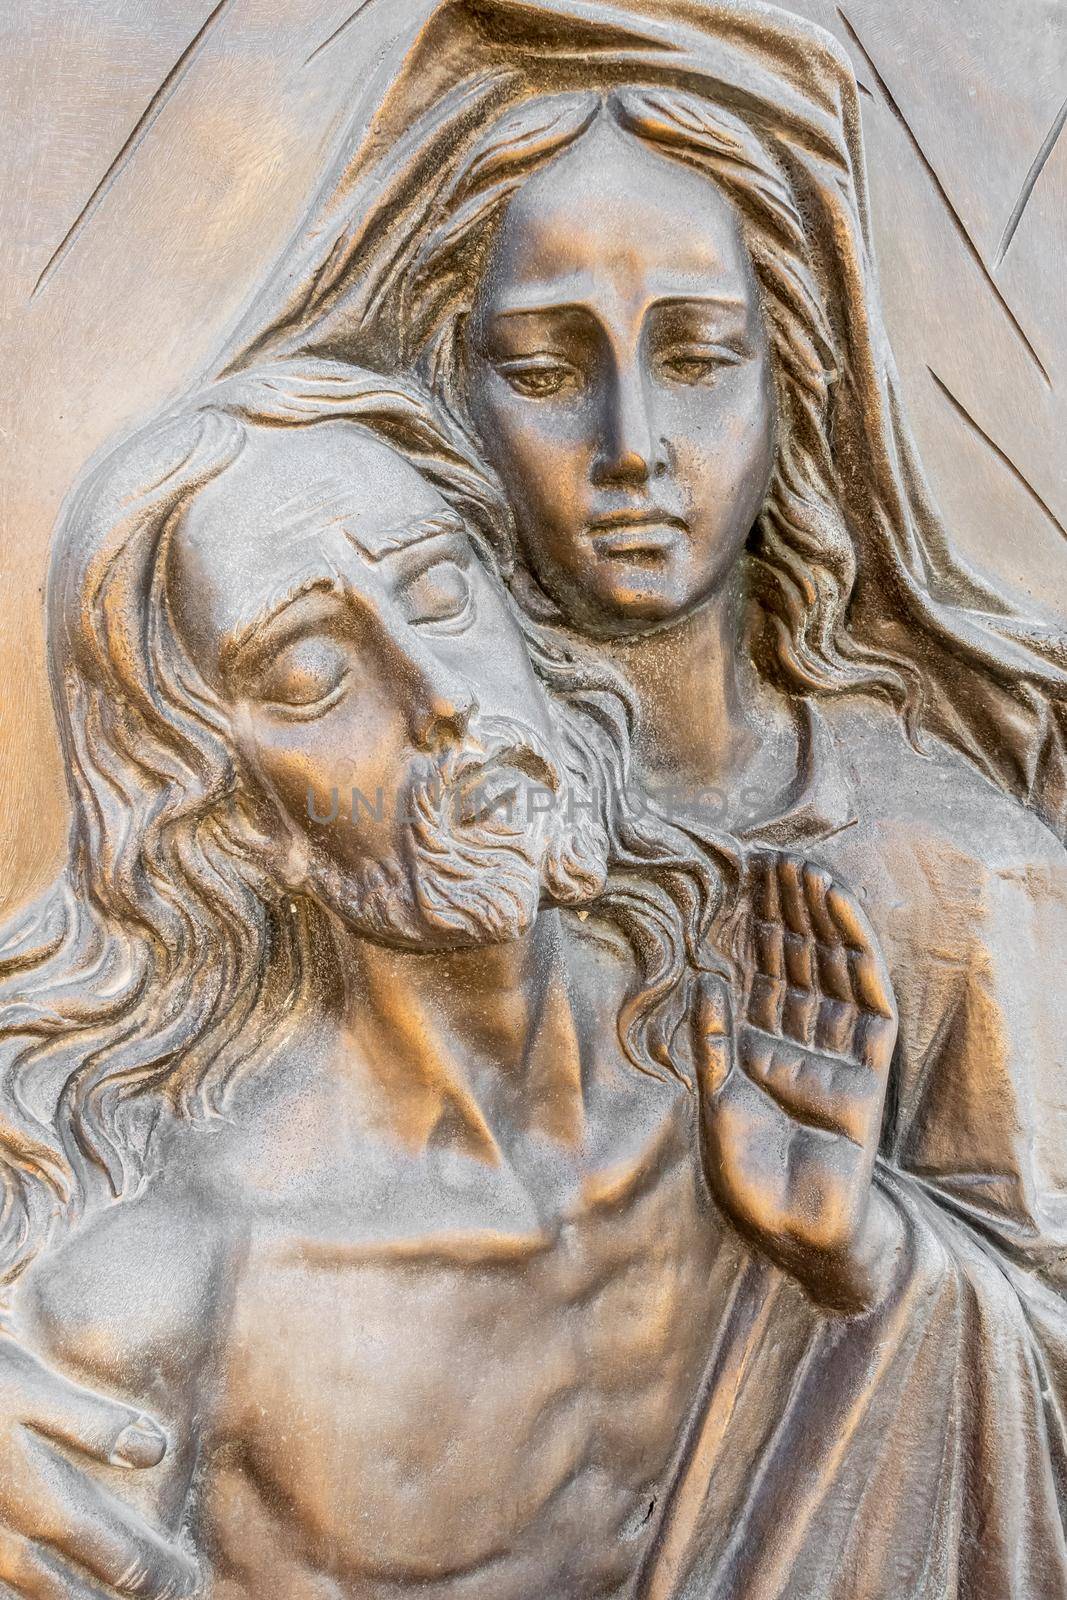 Bas-relief in bronze representing The Pity of Michelangelo. Faces of Holy Mary mother and Jesus Christ after the Crucifixion.